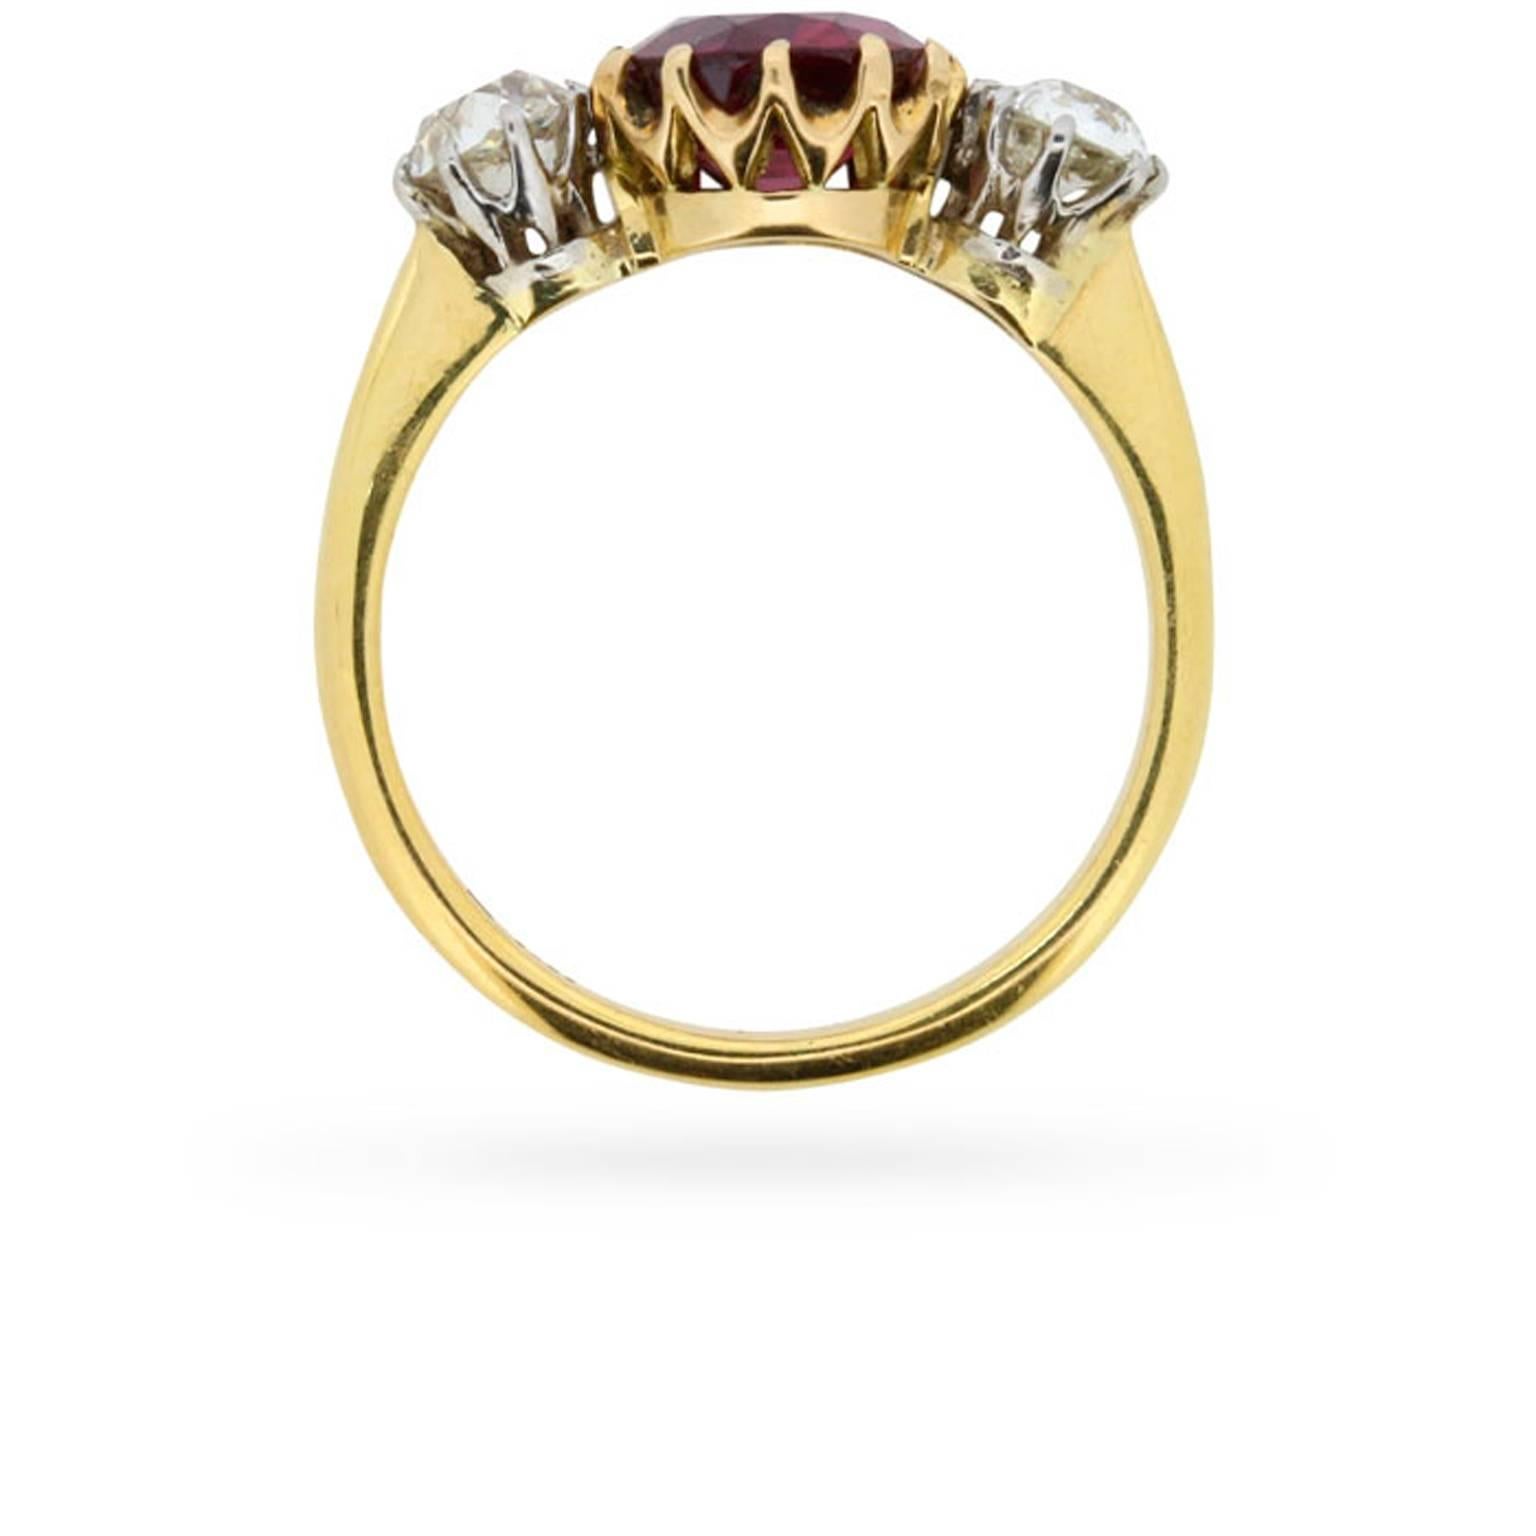 Between a pair of 0.35 carat old cut diamonds, this Victorian era three stone ring centres a 1.90 carat, oval-shaped, natural transparent red ruby, which has been independently certified by the Gem & Pearl Laboratory. The diamonds are H in colour,